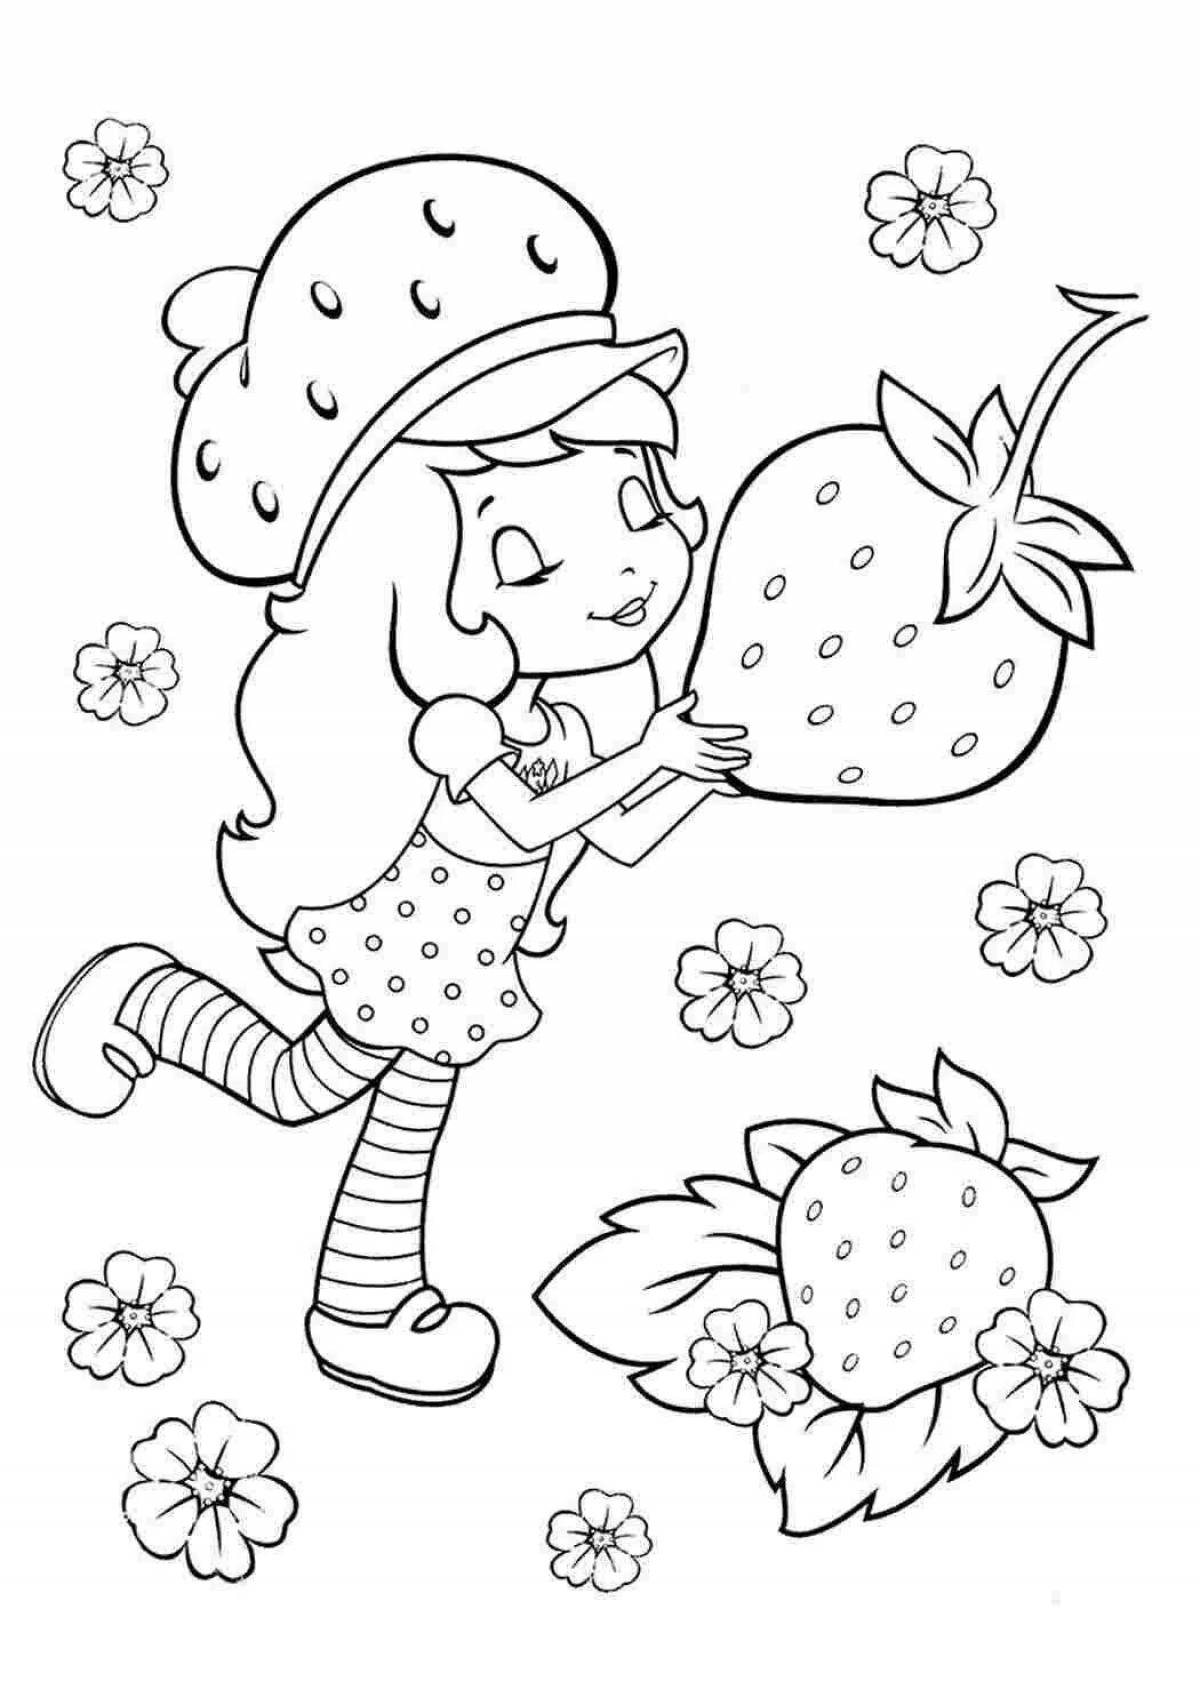 Coloring book for girls strawberry